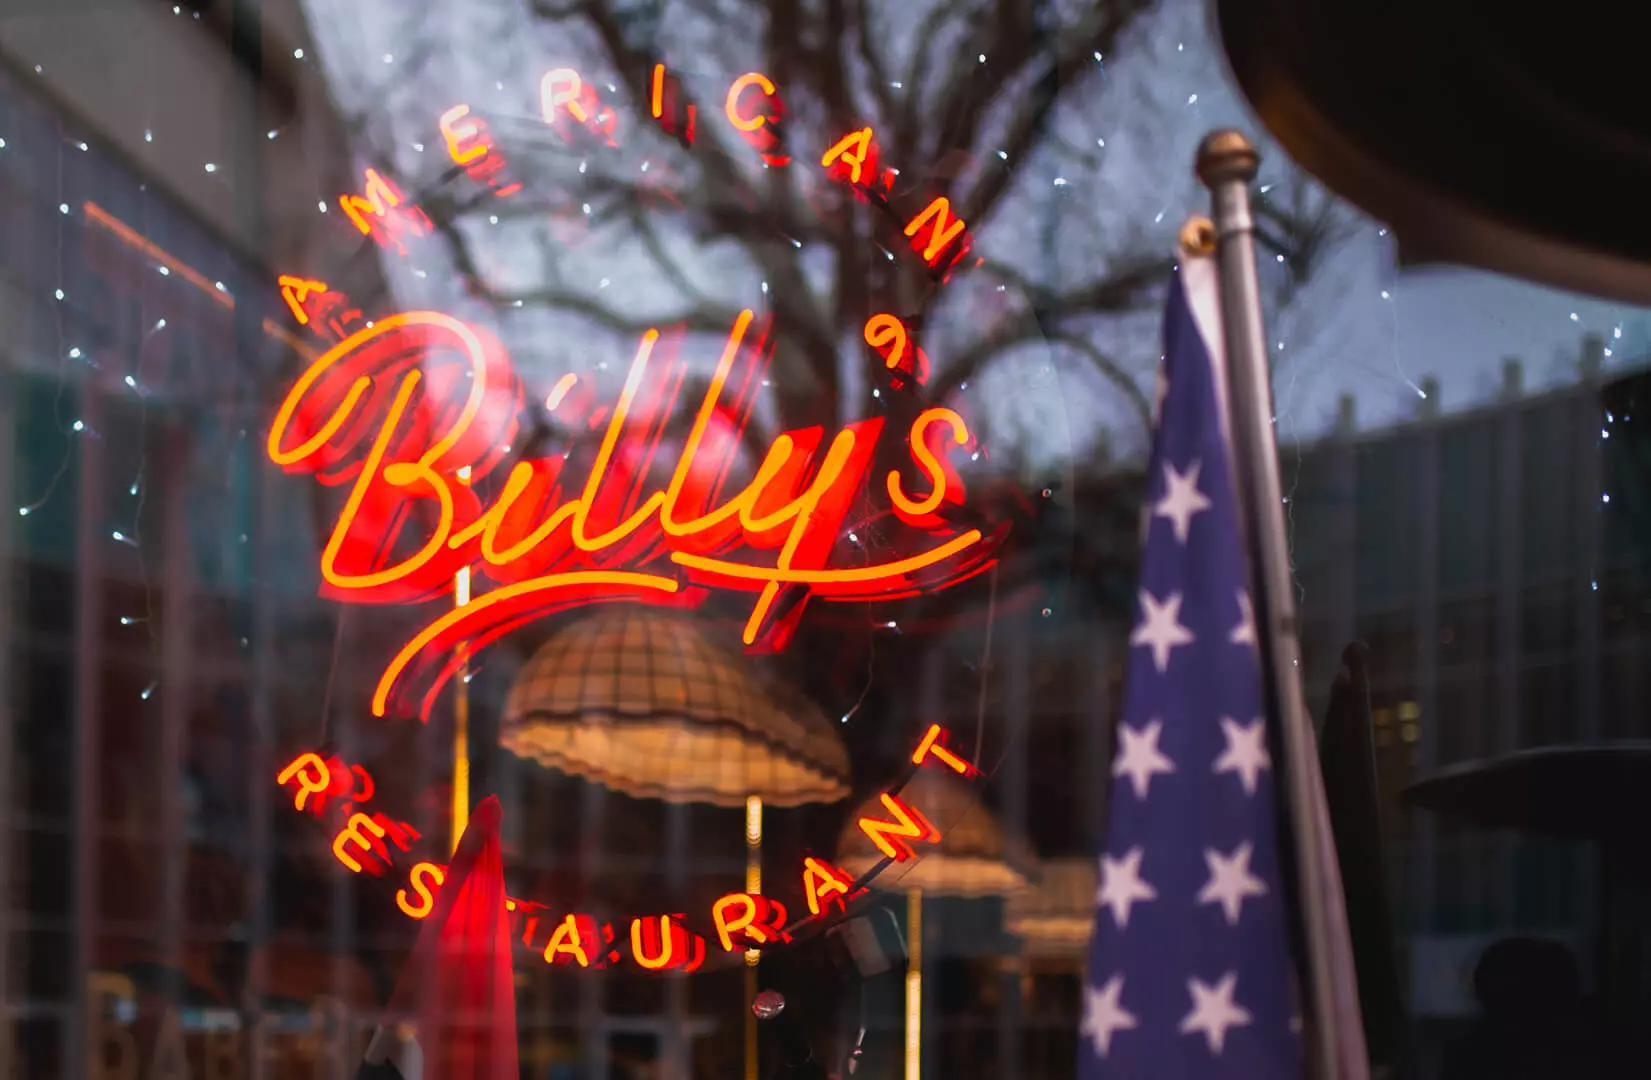 Billy's - Red neon sign for inside in restaurant